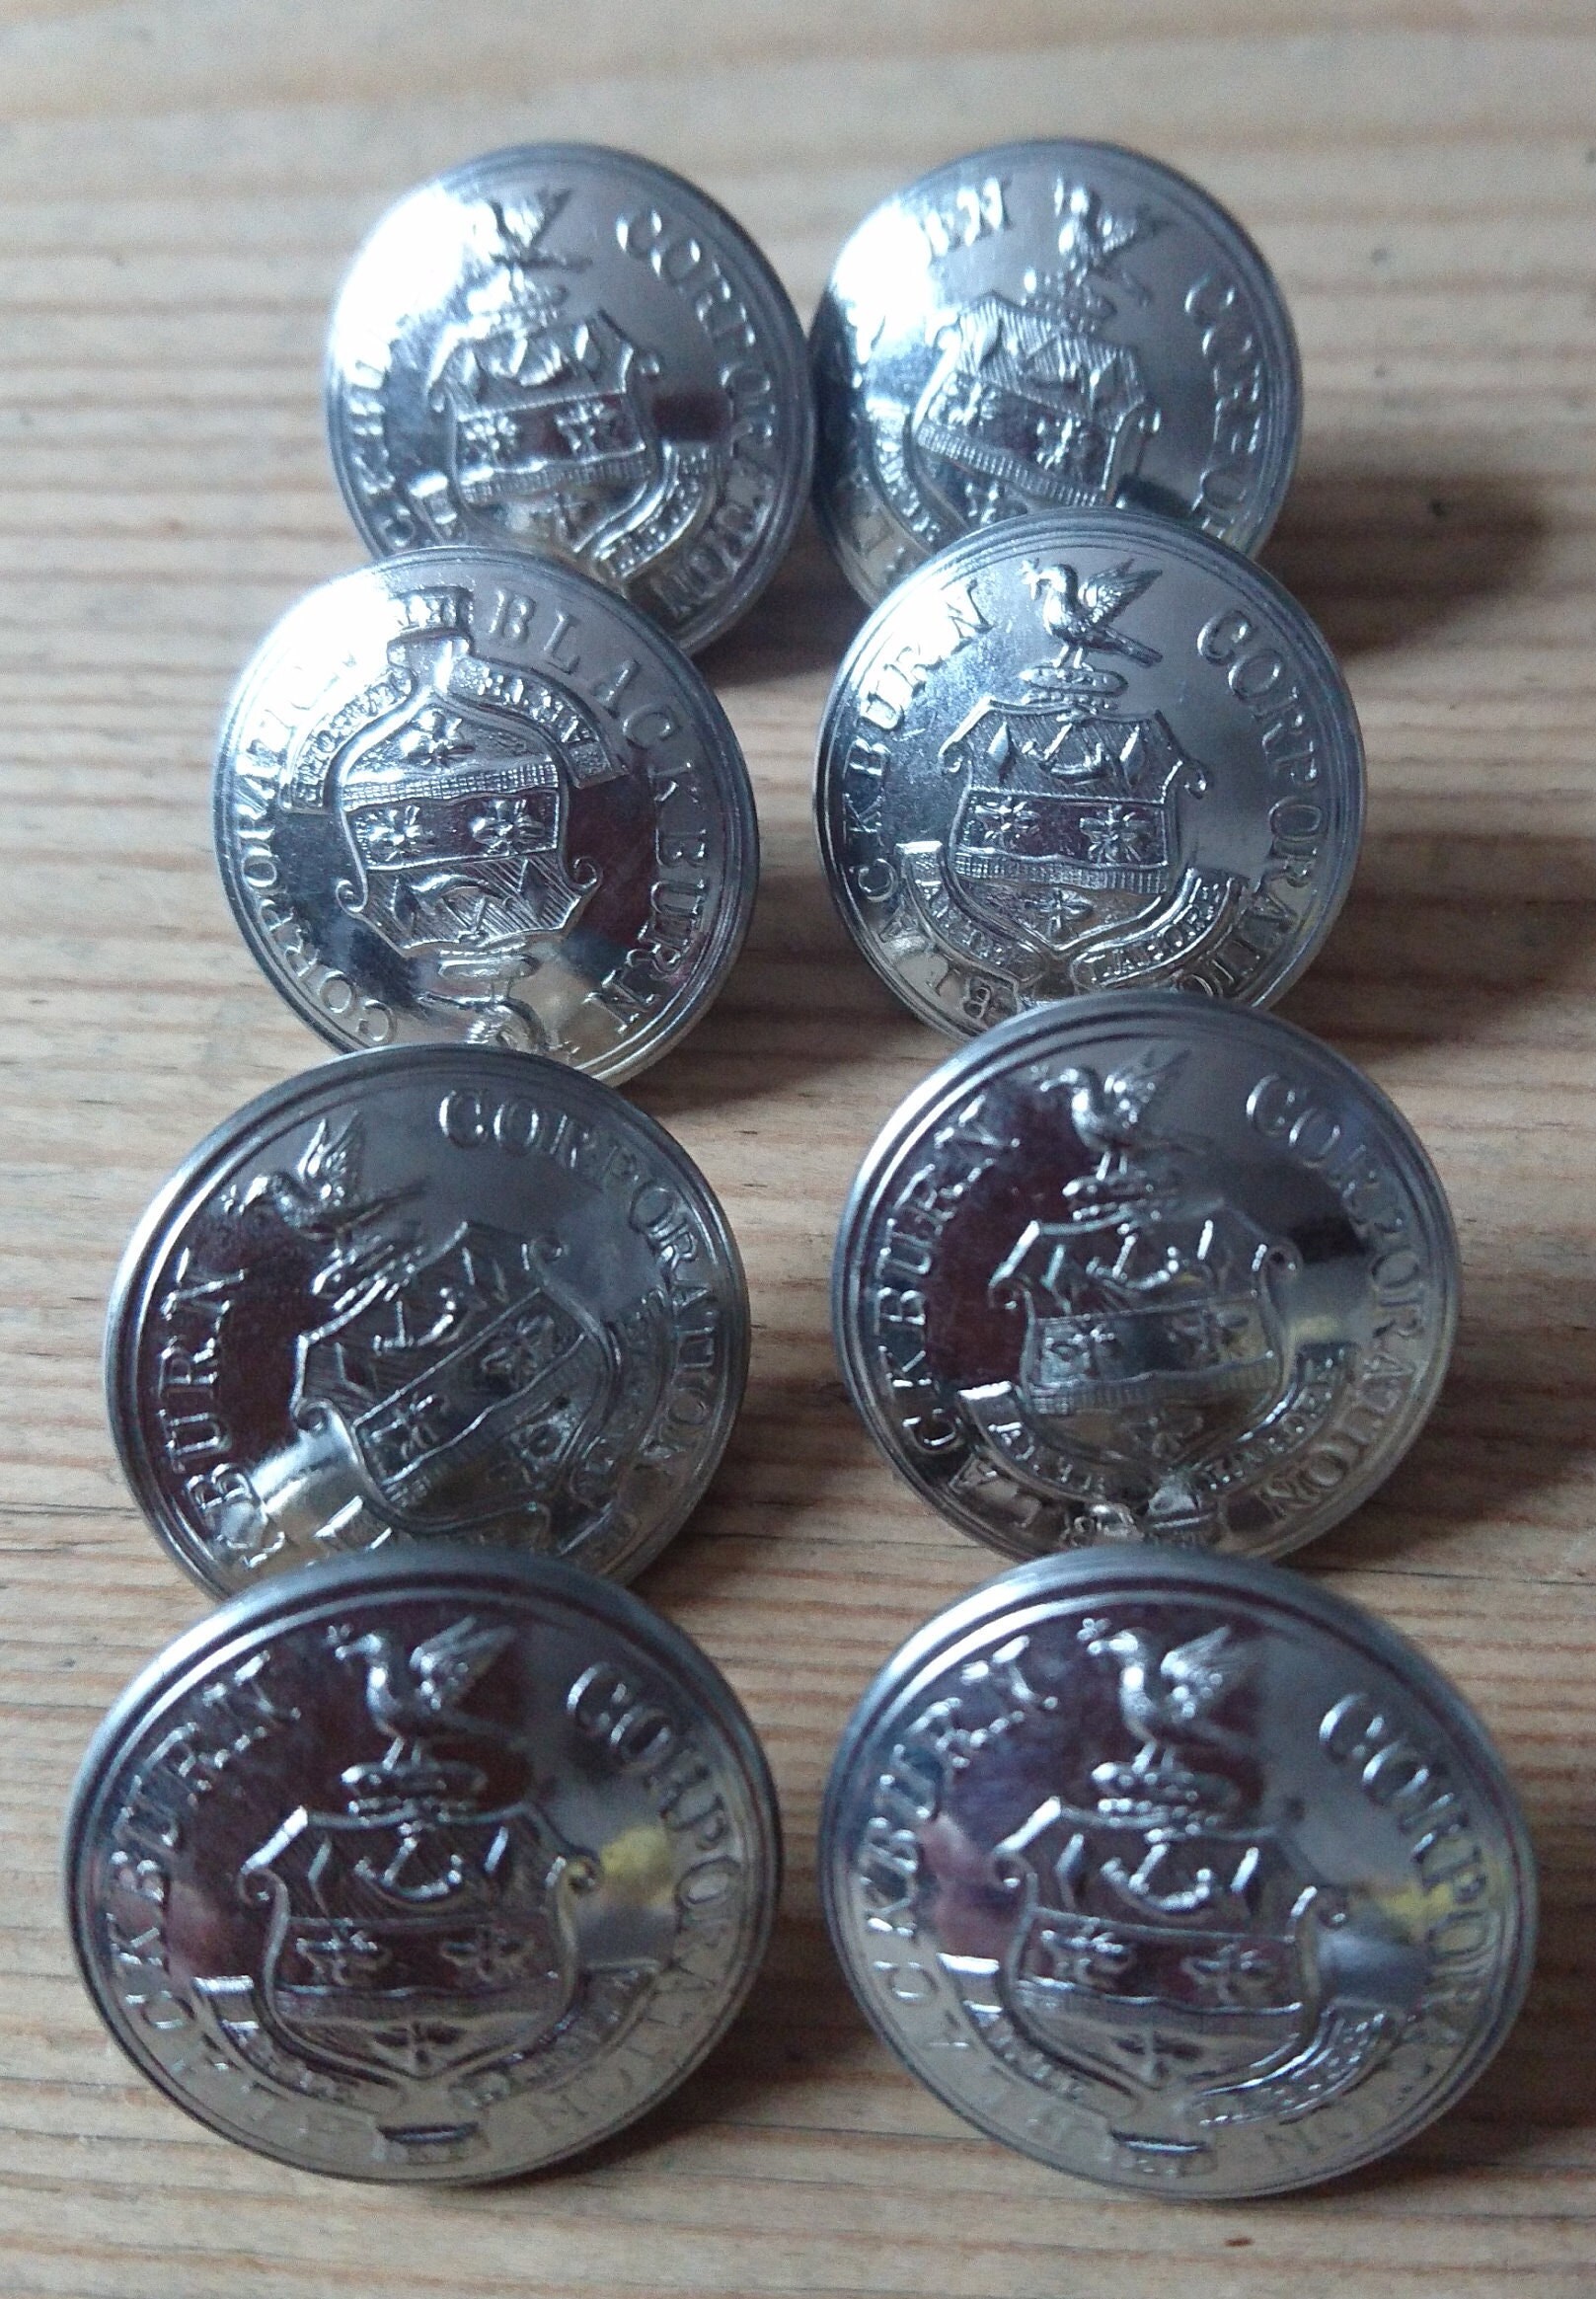 Lot 8 Authentic Vintage Buttons Infinite Branded 